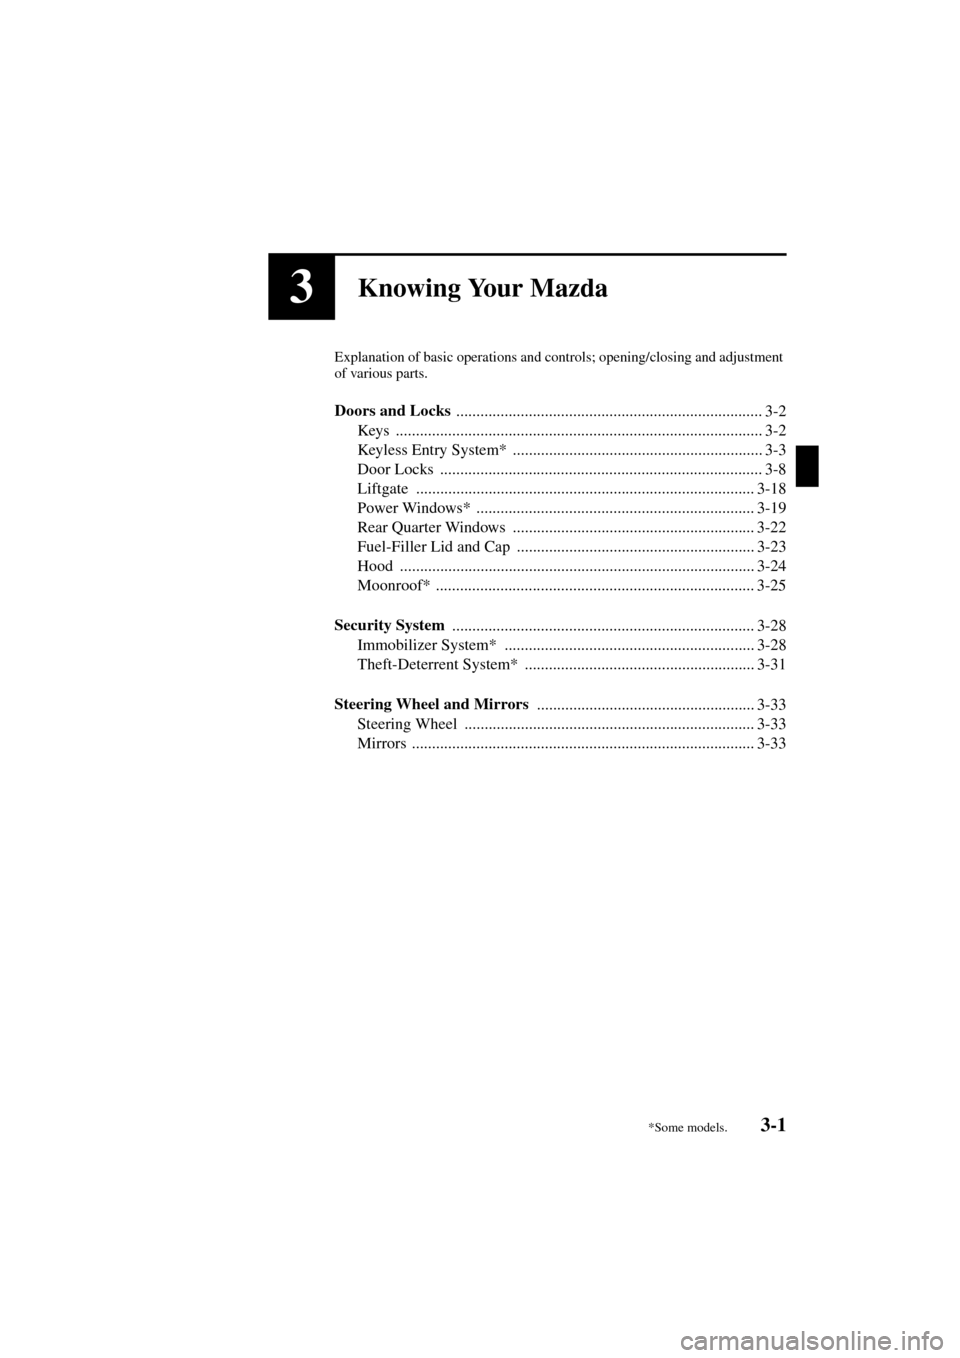 MAZDA MODEL MPV 2004  Owners Manual (in English) 3-1
Form No. 8S06-EA-03H
3Knowing Your Mazda
Explanation of basic operations and controls; opening/closing and adjustment 
of various parts.
Doors and Locks 
..........................................